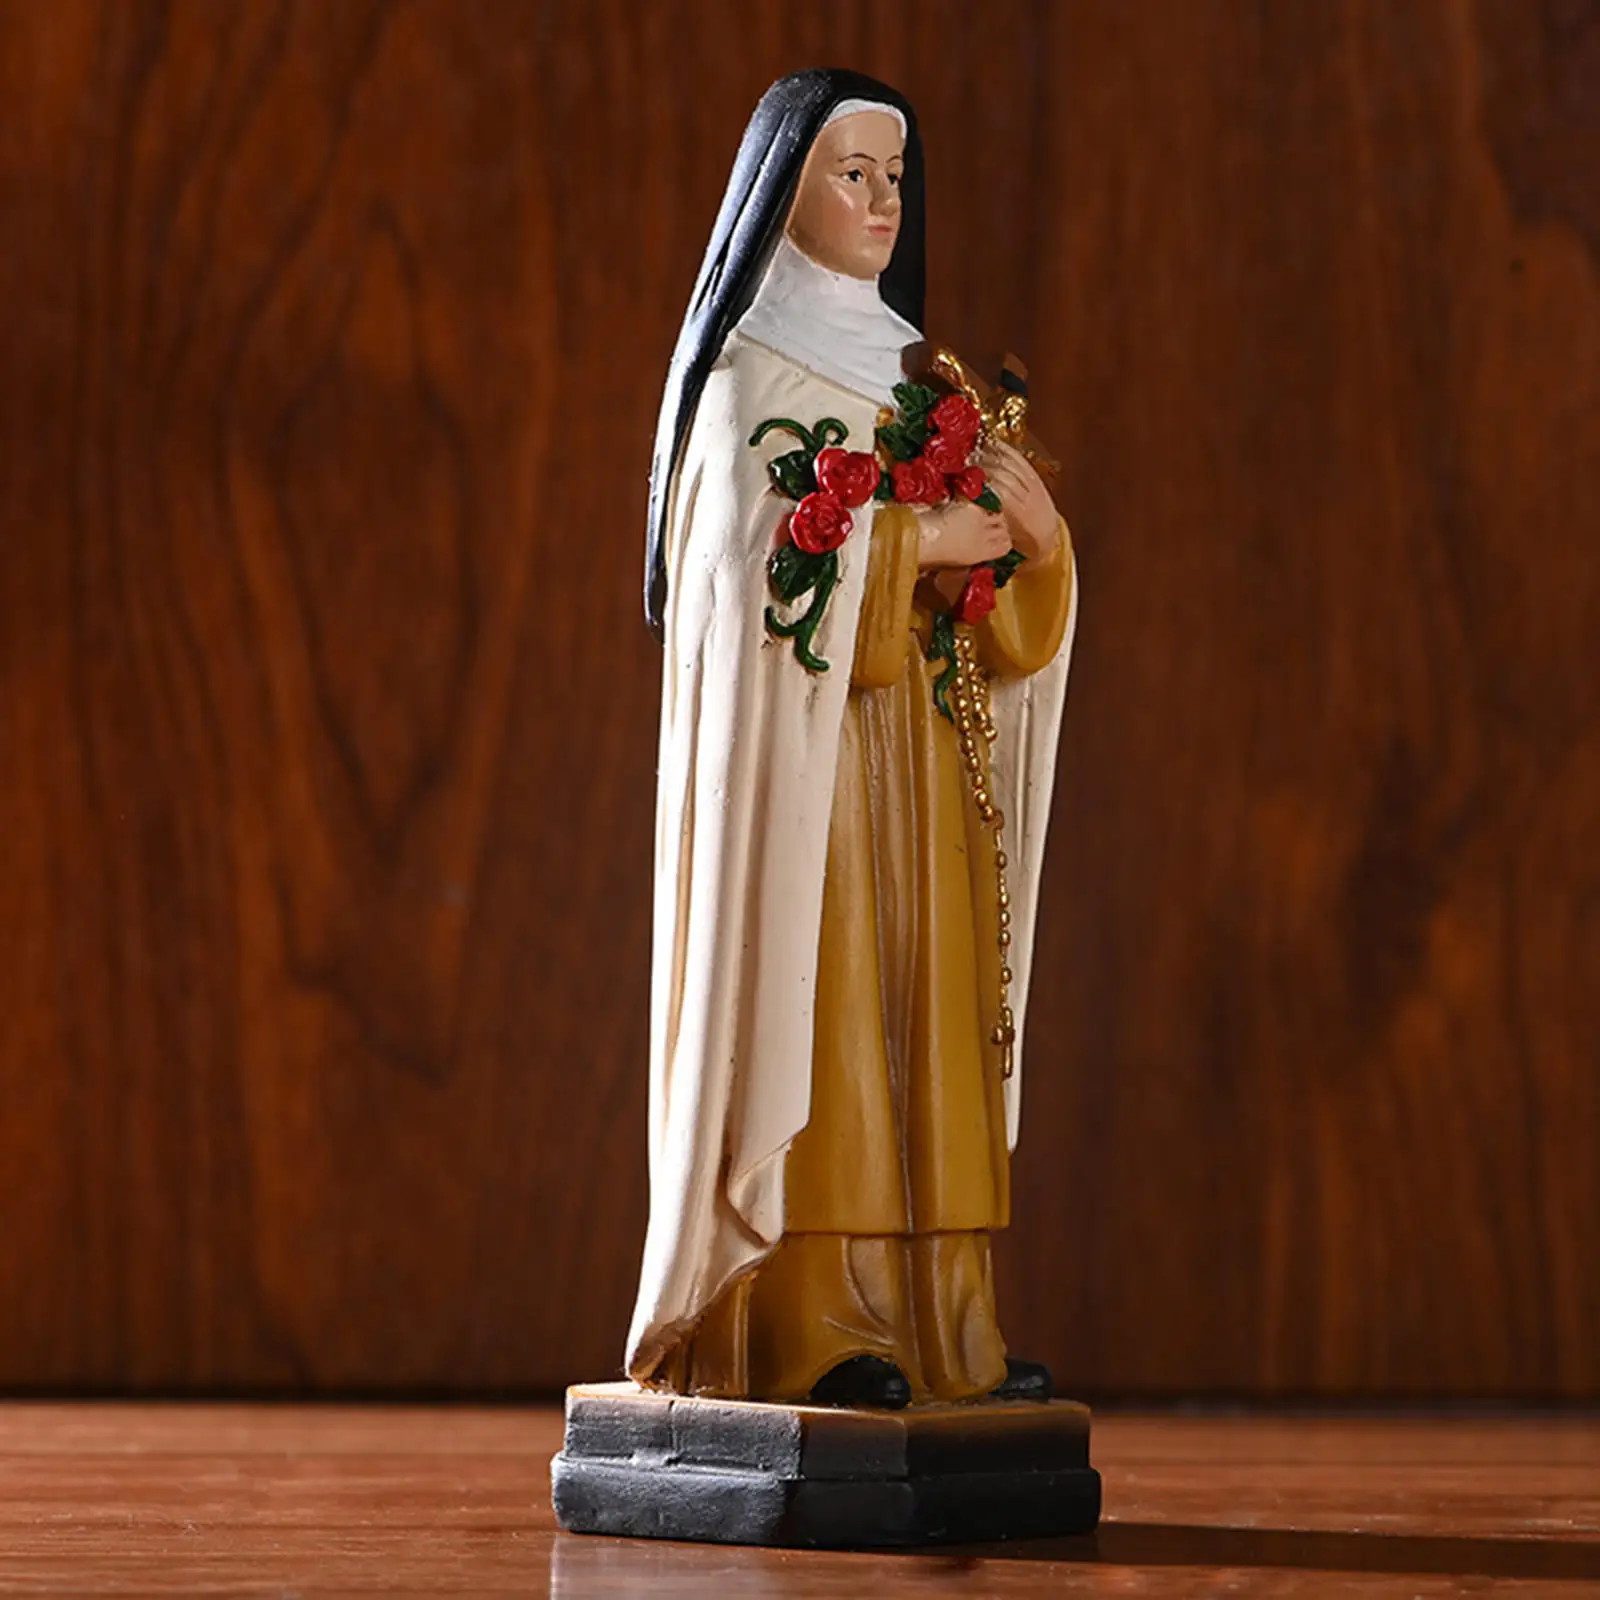 21cm Religious Display Virgin Mary Statue Resin Figurine Sculpture Figure Crafts for Christian Church